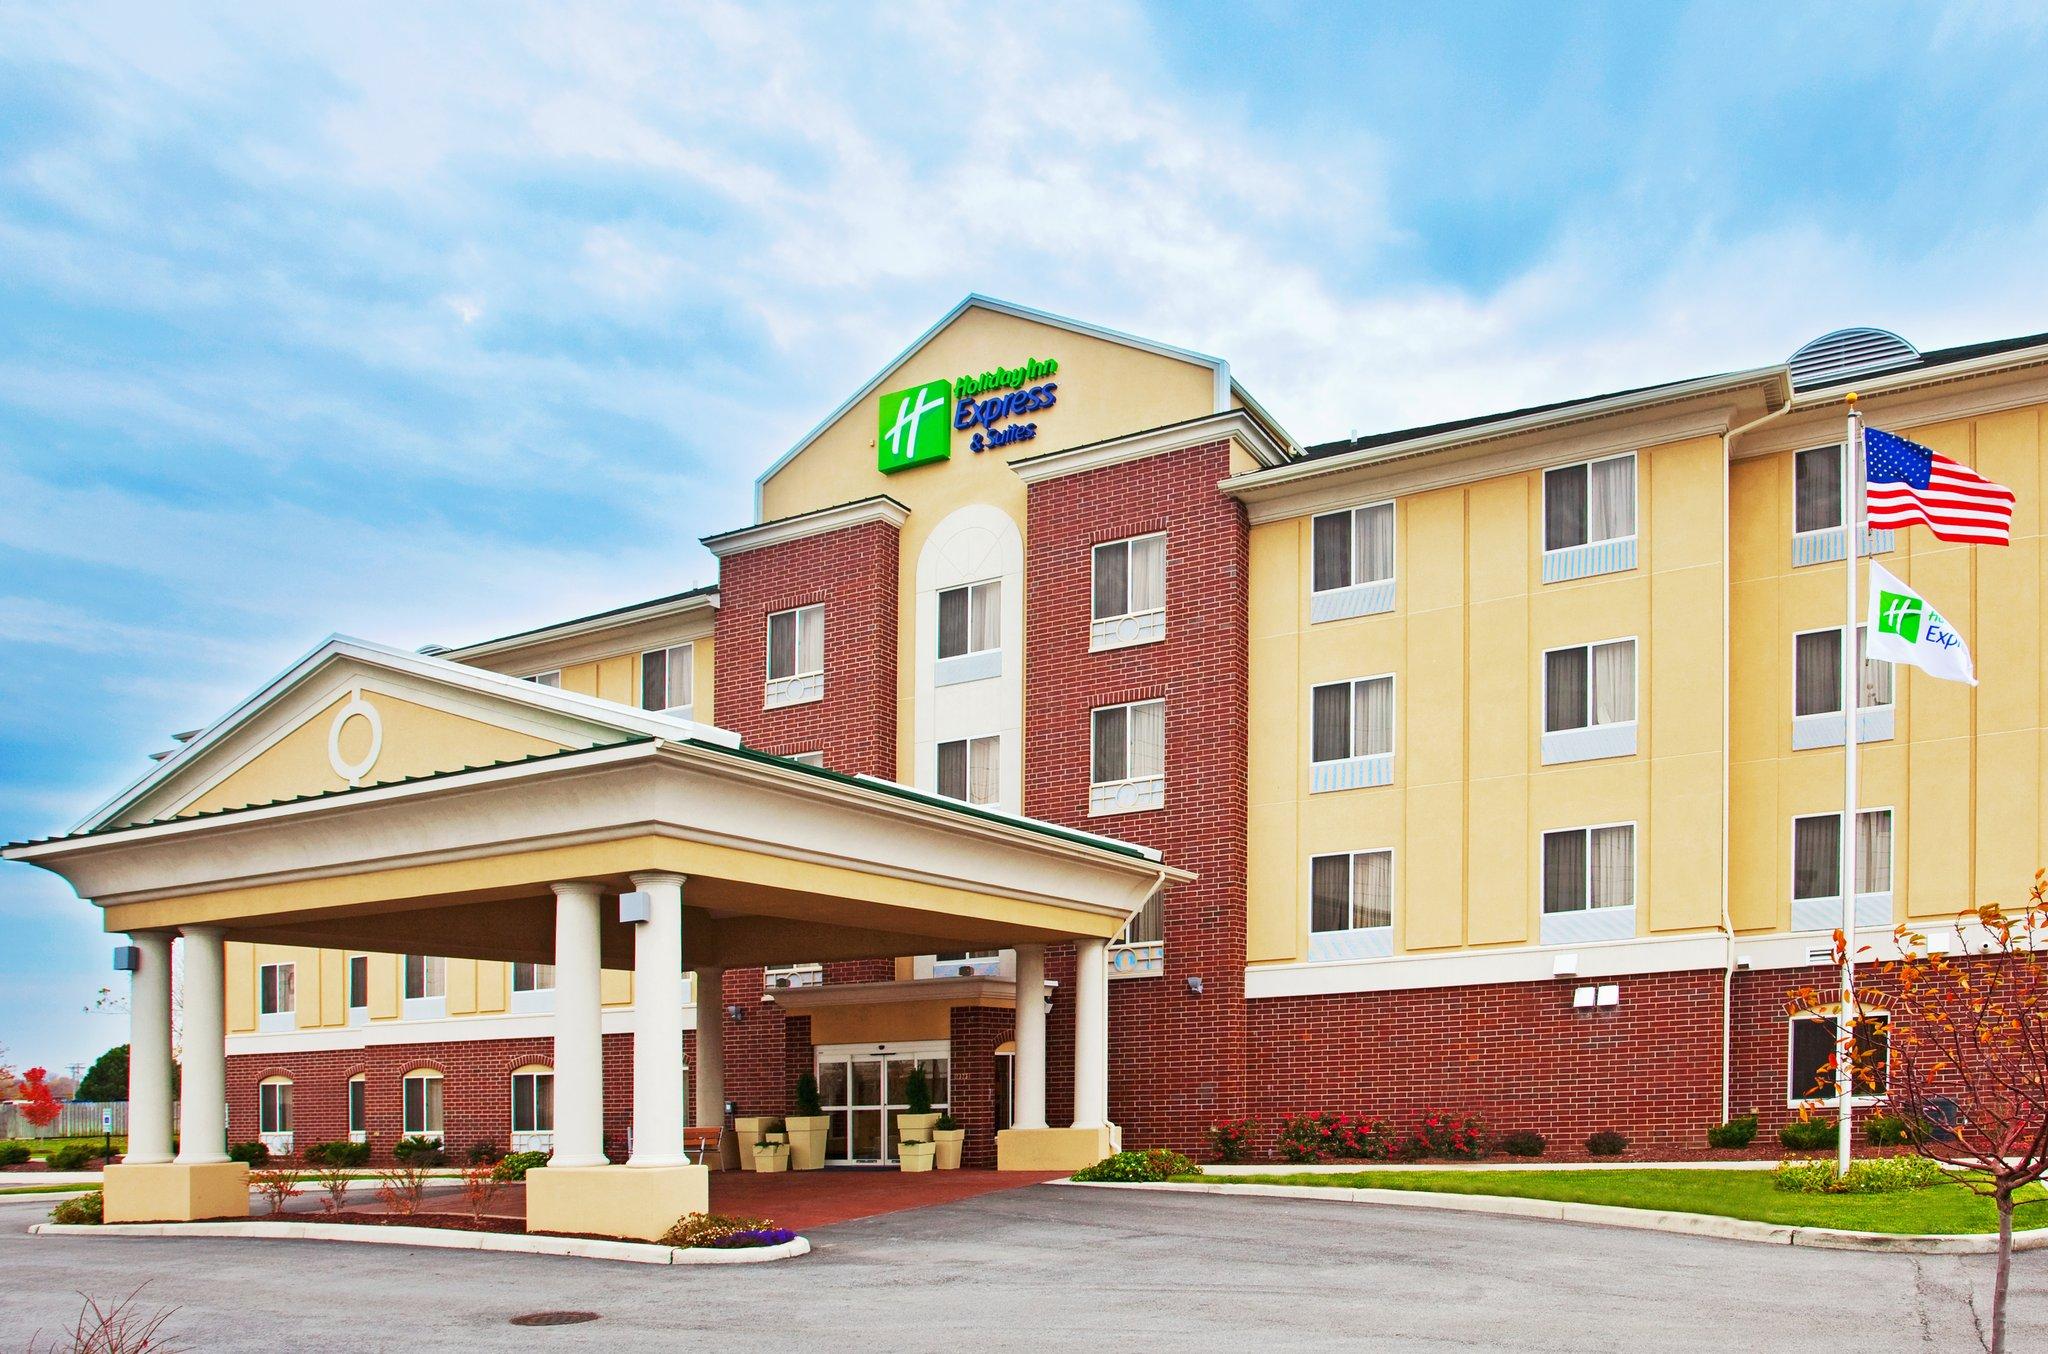 Holiday Inn Express Hotel & Suites Chicago South Lansing in Lansing, IL